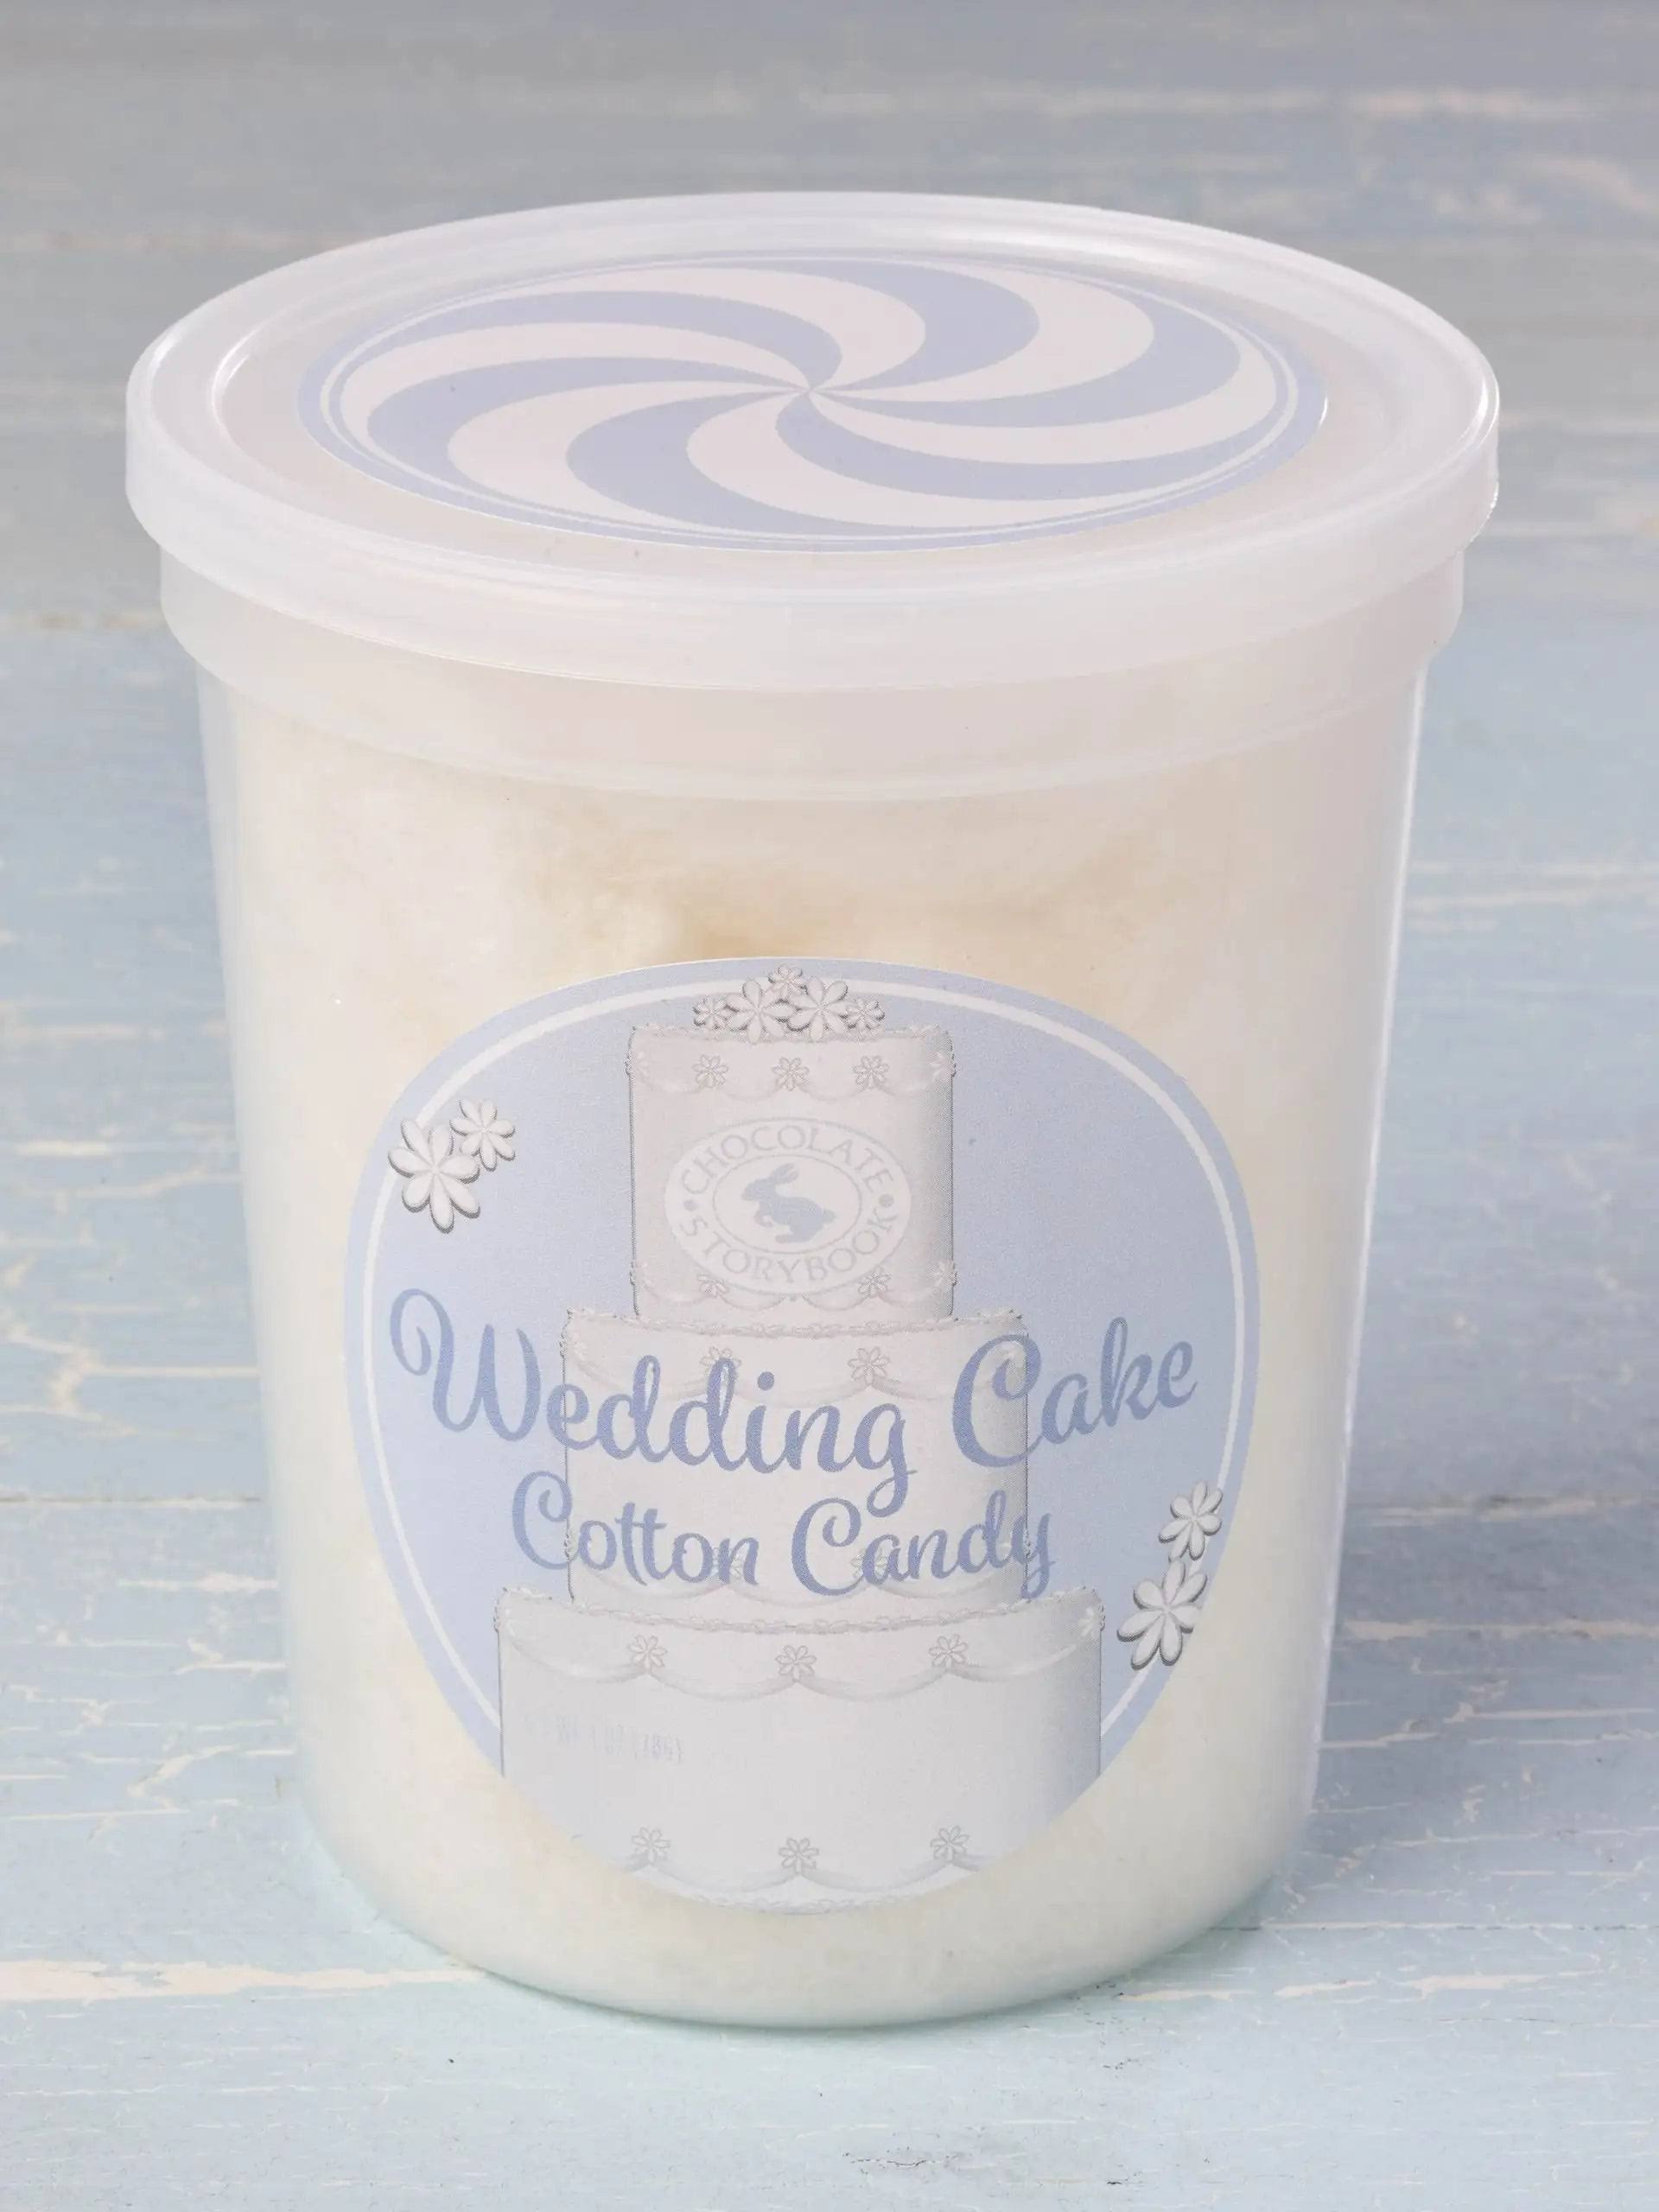 Wedding Cake Gourmet Flavored Cotton Candy Unique Idea For Holidays,